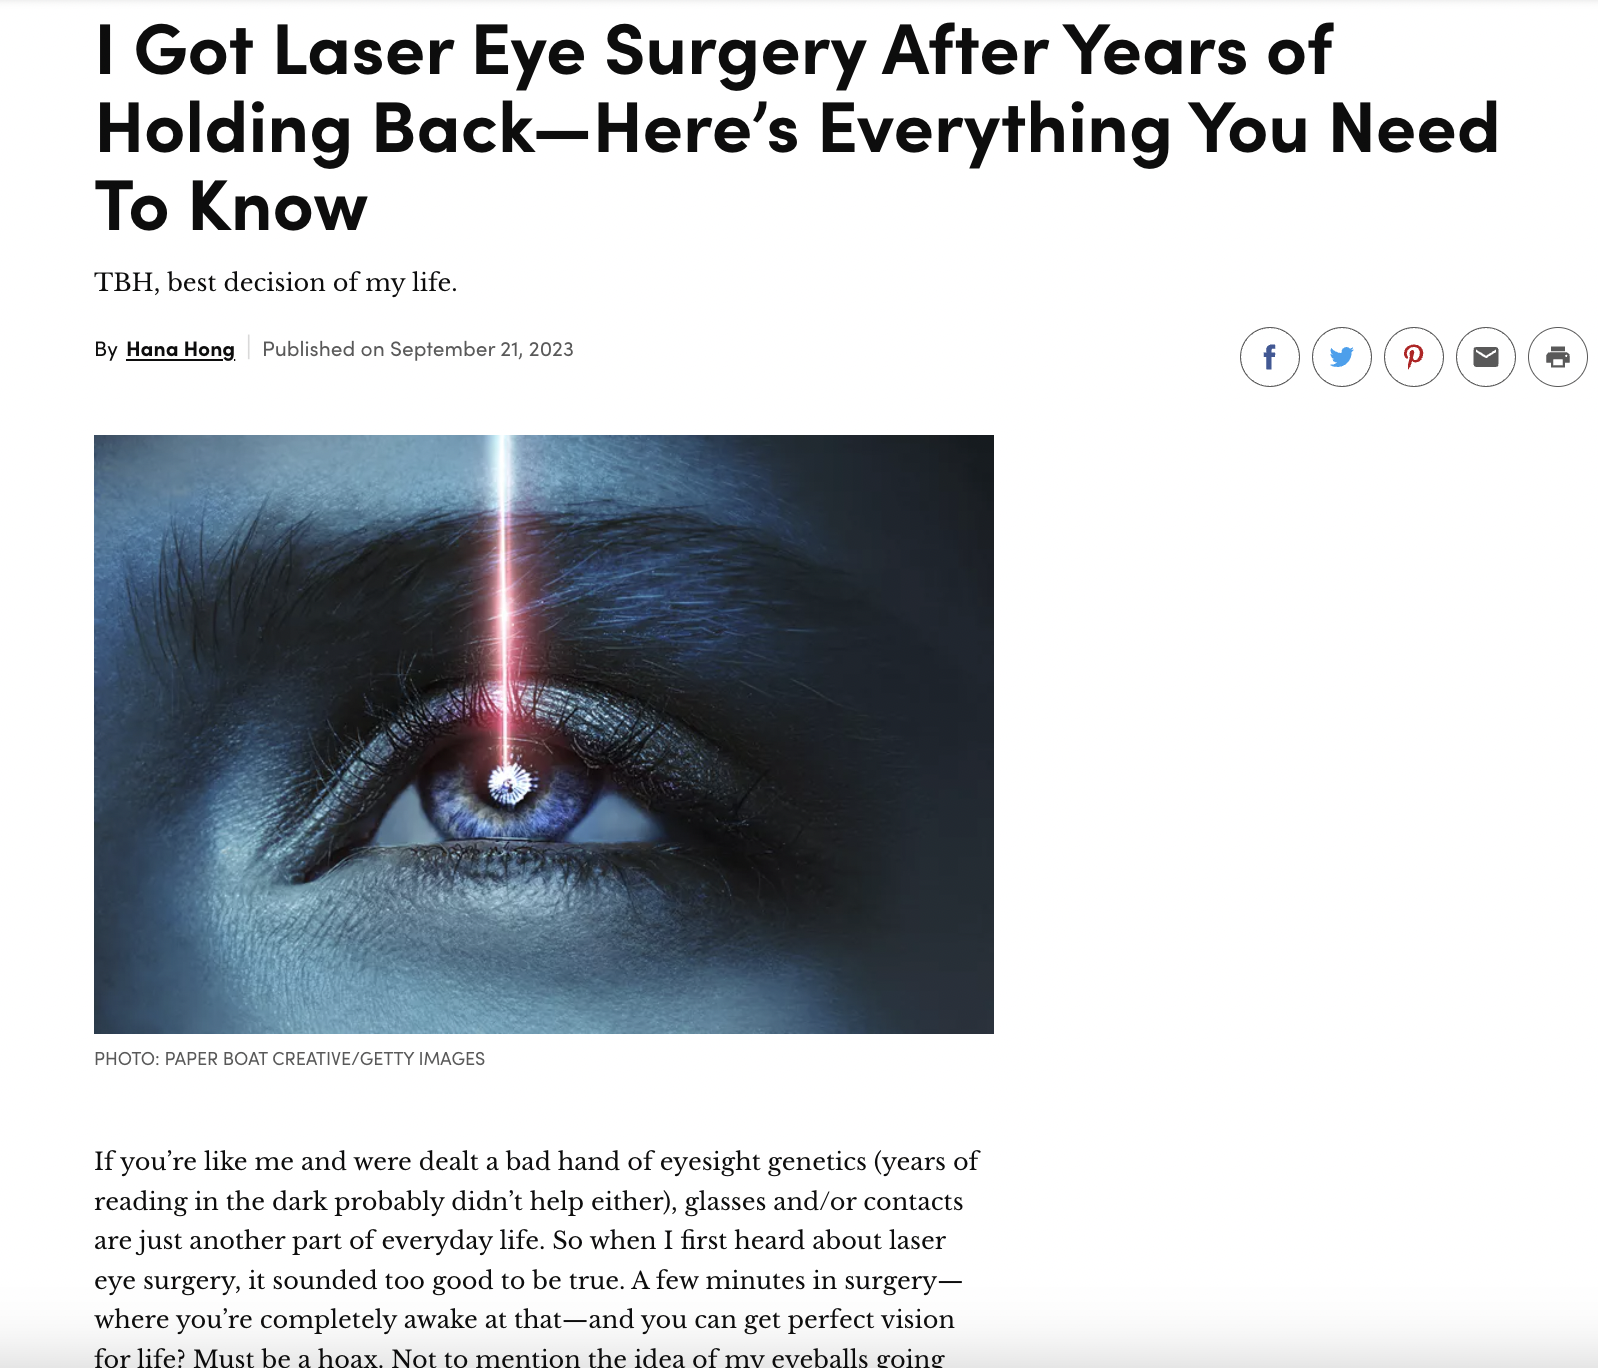 I Got Laser Eye Surgery After Years of Holding Back article image